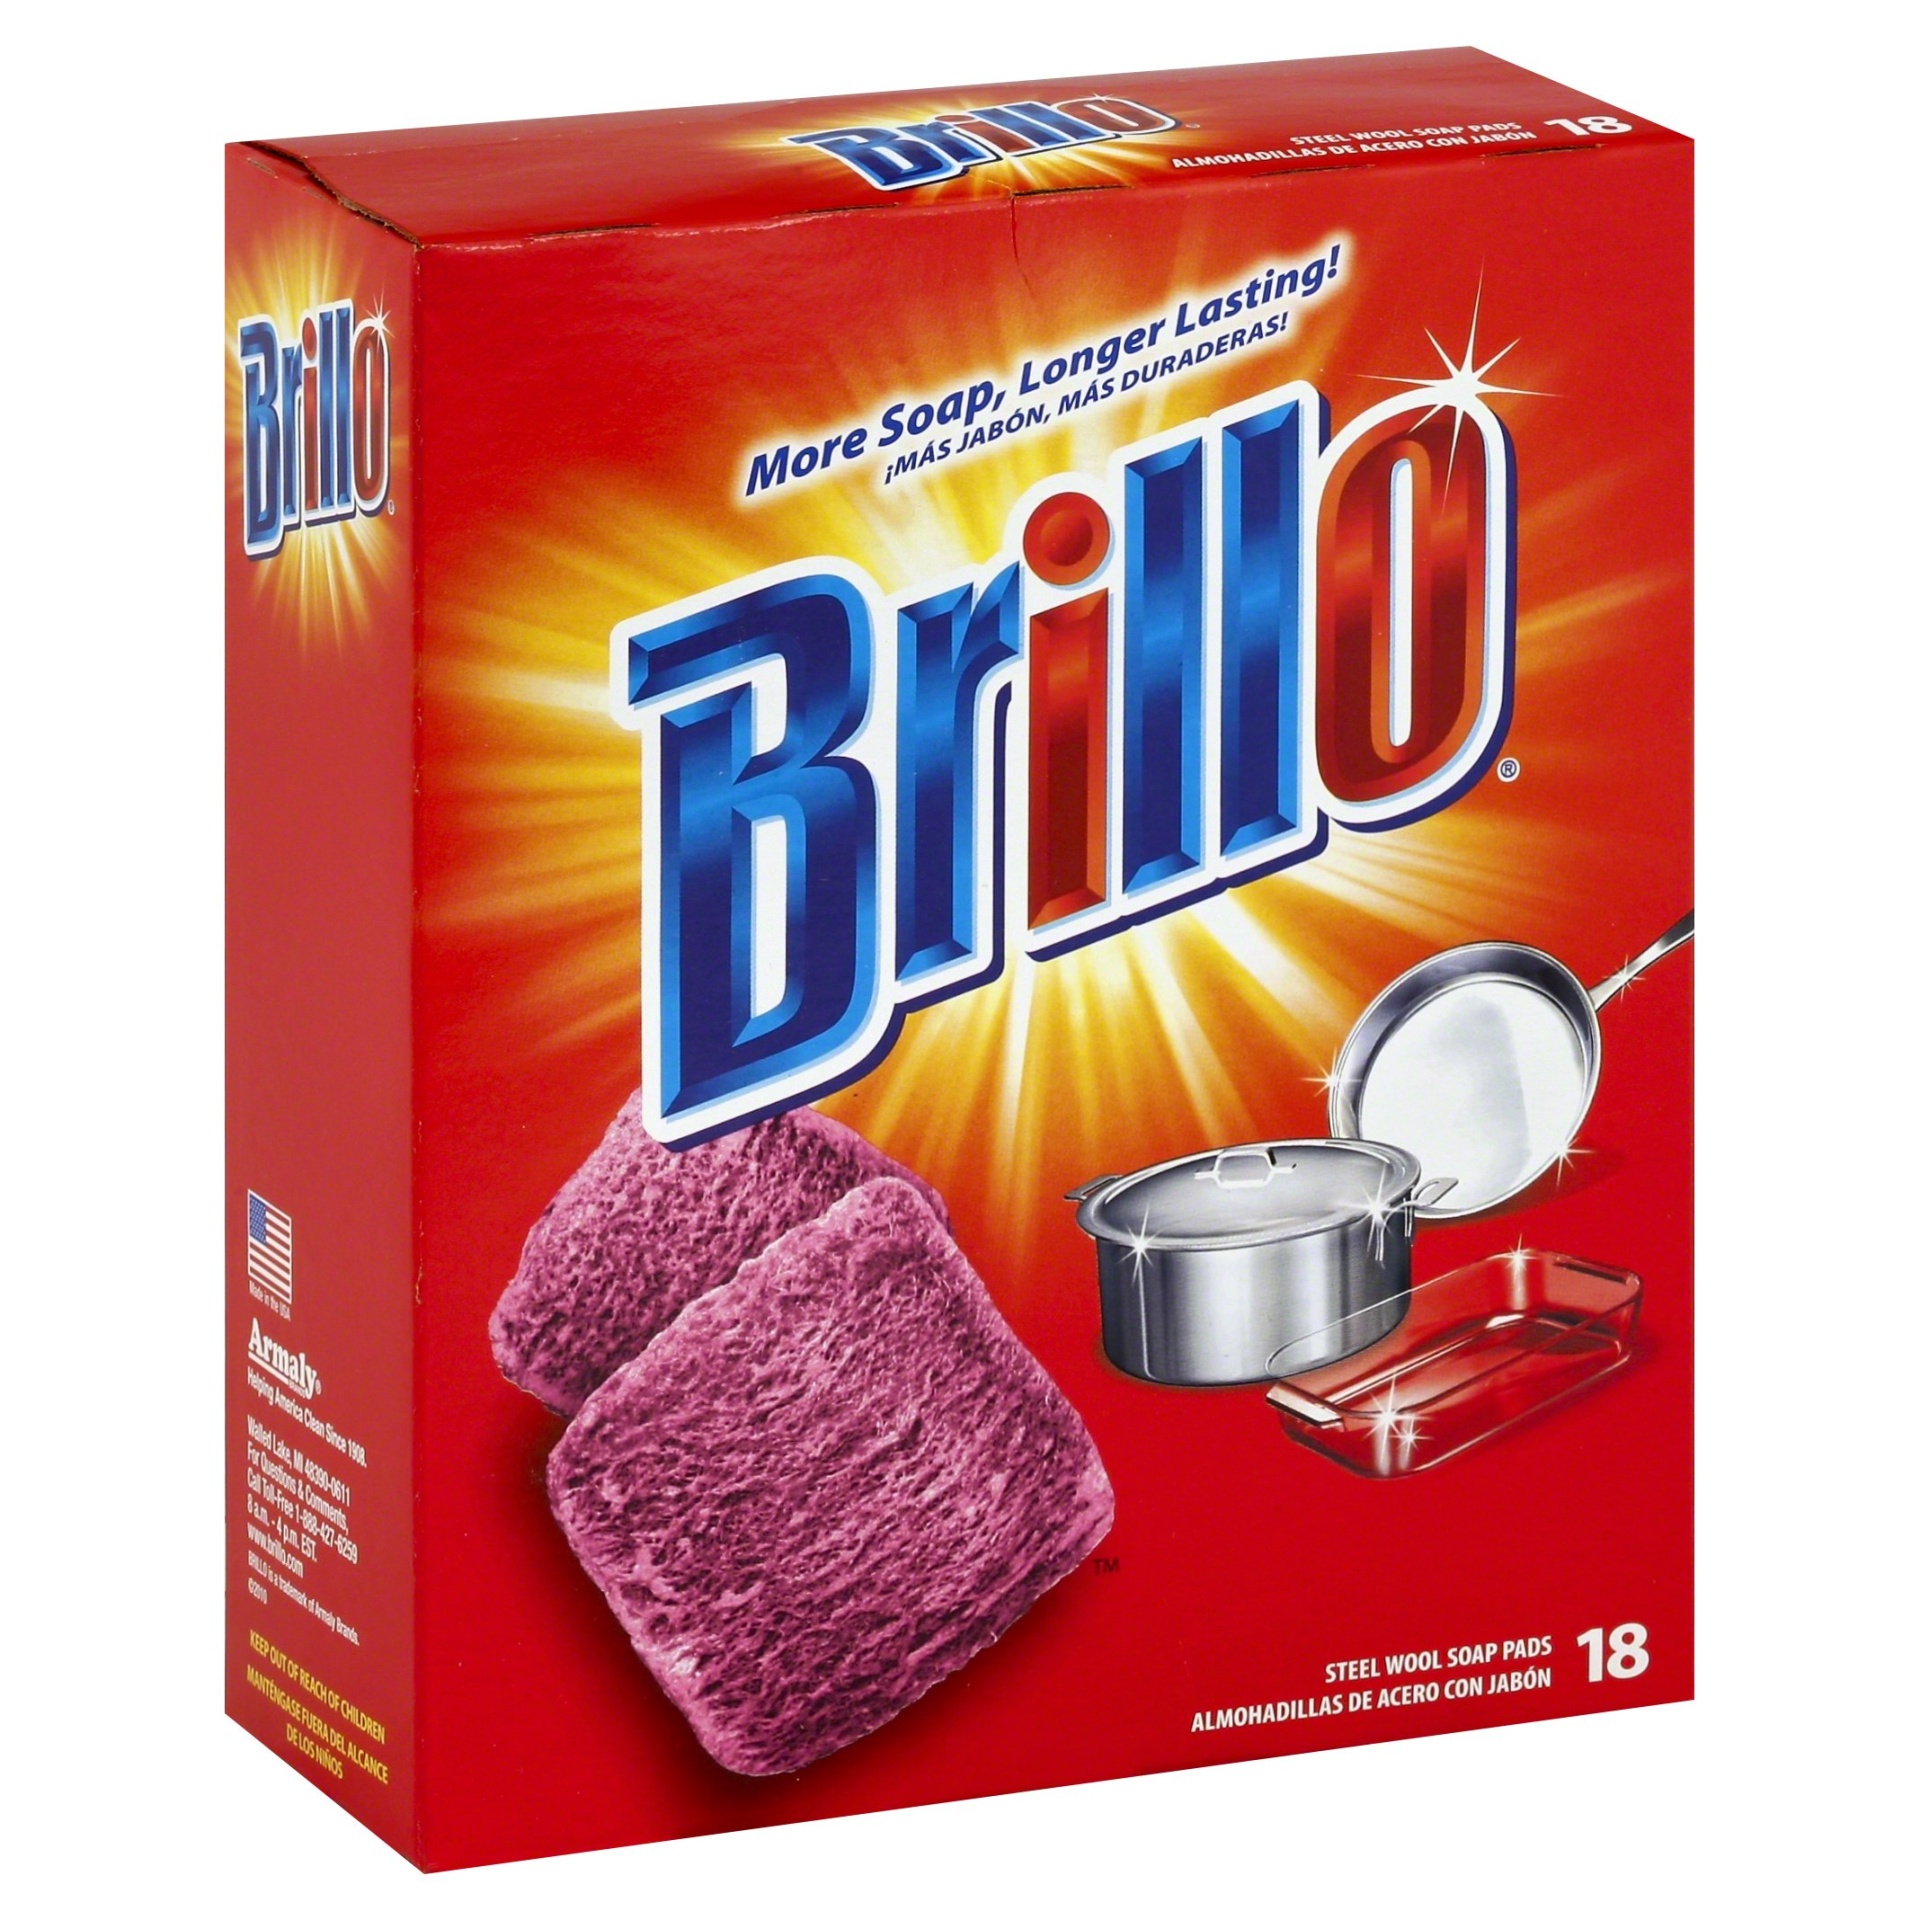 slide 1 of 2, Brillo Steel Wool Soap Pads Red, 18 ct